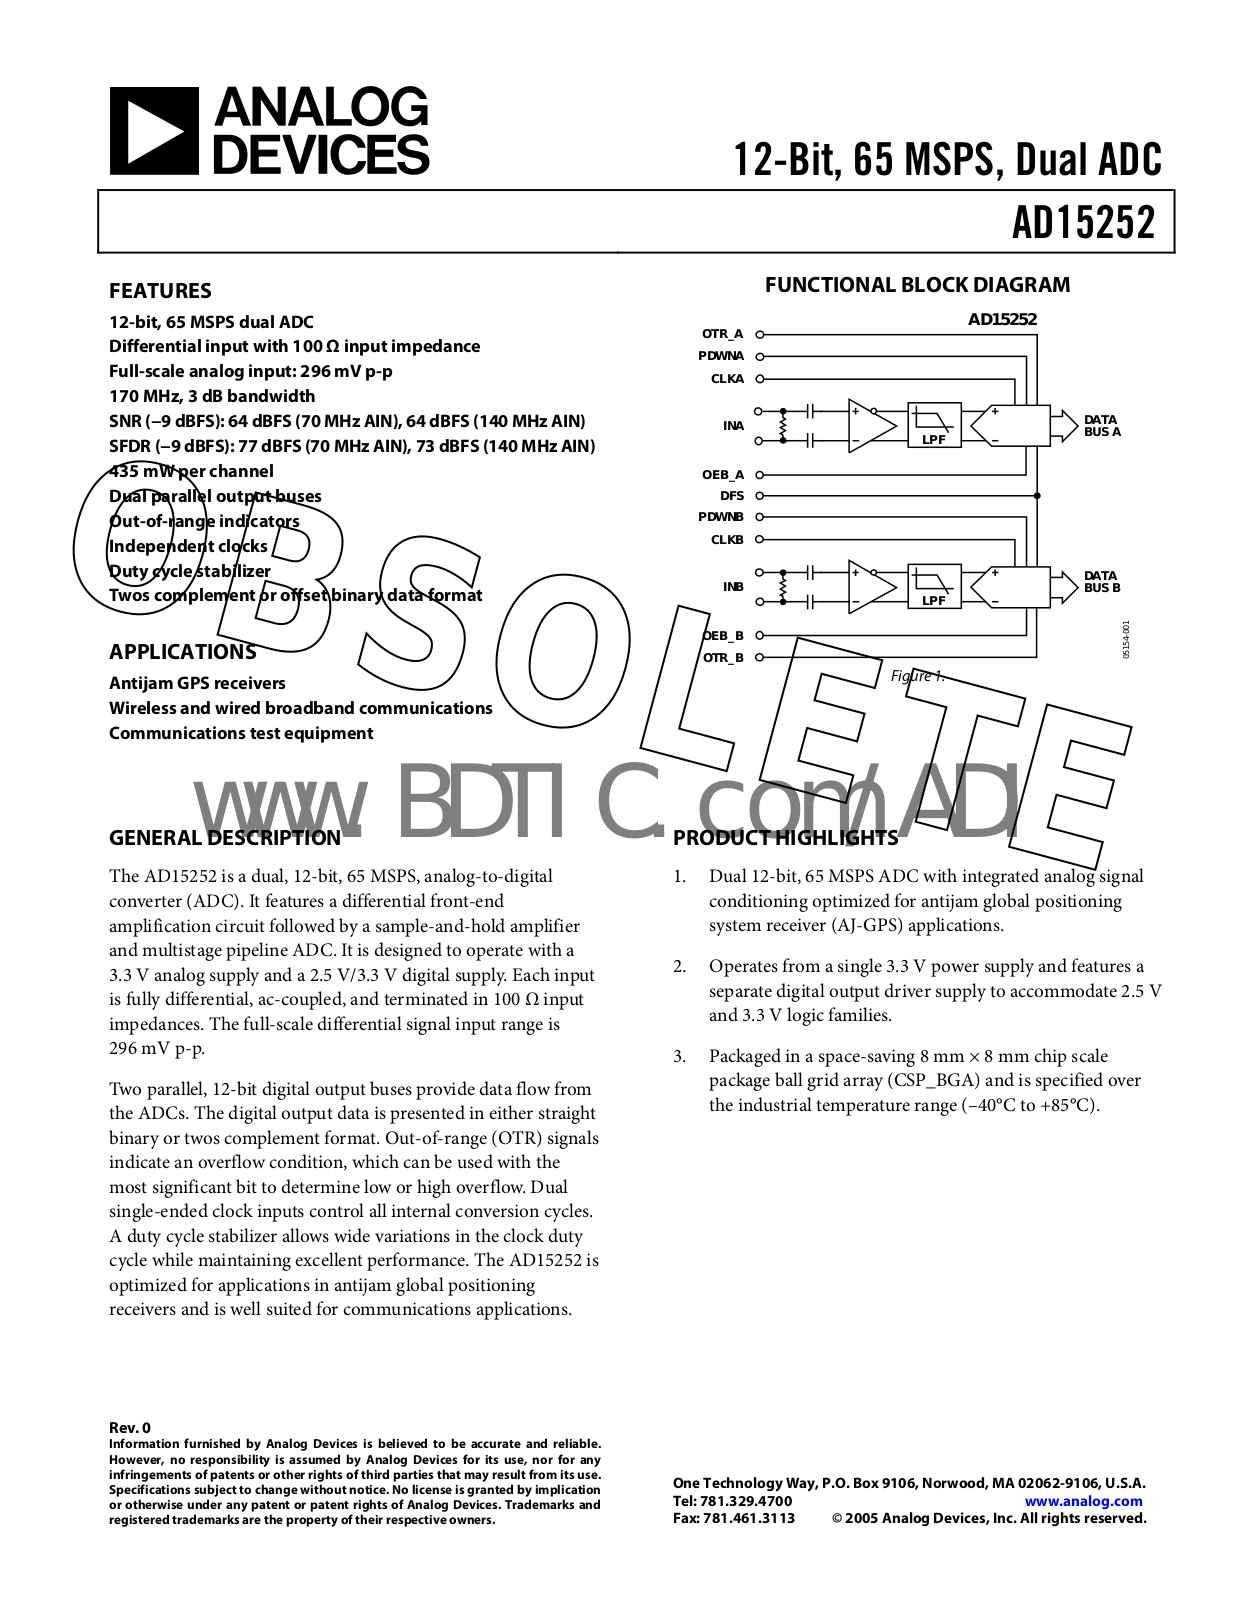 ANALOG DEVICES AD15252 Service Manual